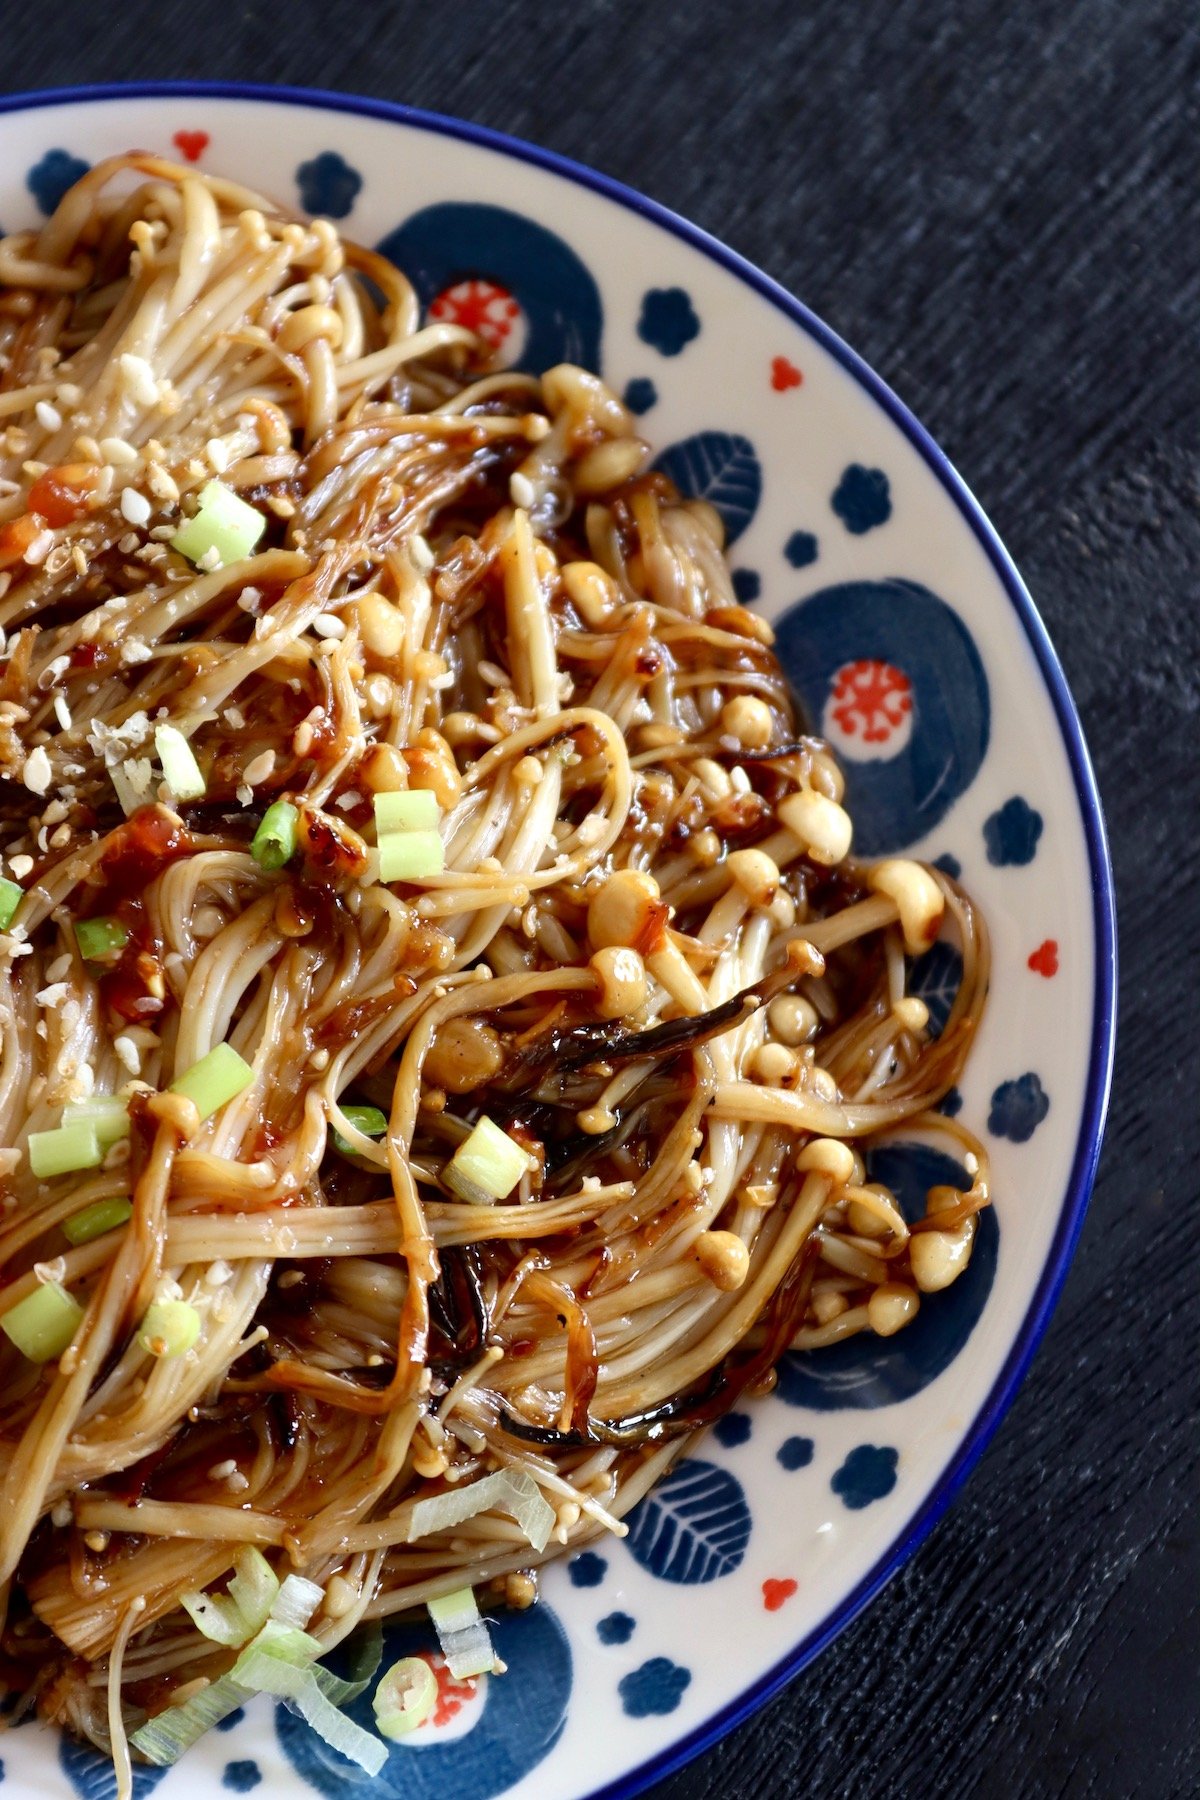 White plate with a blue and red dot-like pattern along the edges, full with enoki mushrooms in a spicy Asian sauce.